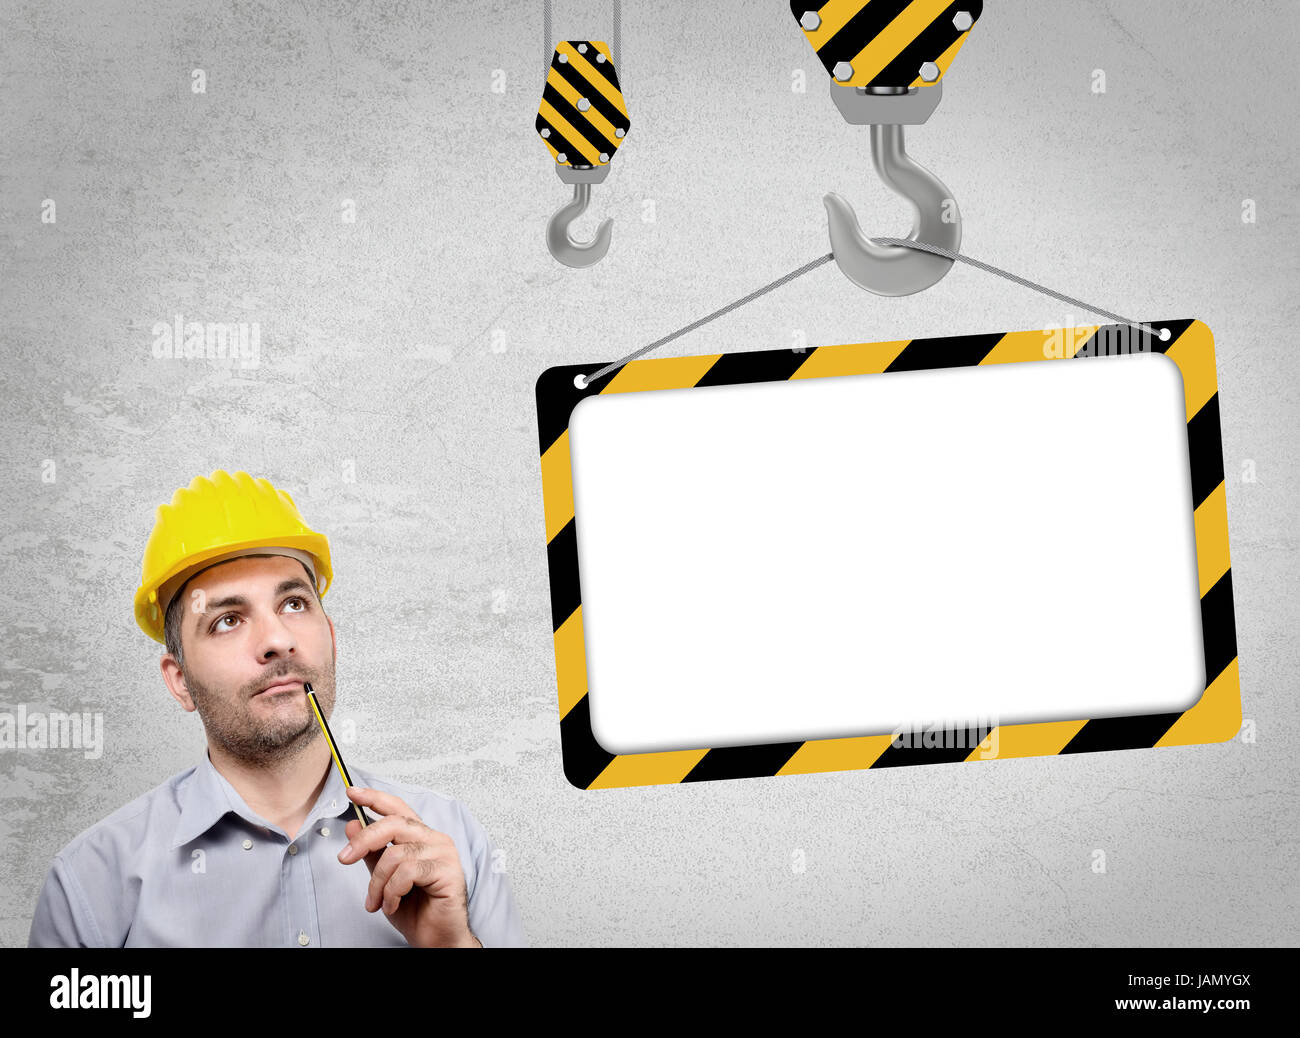 Engineer with a helmet on his head, reflecting staring into the void holding a pencil under her nose Stock Photo